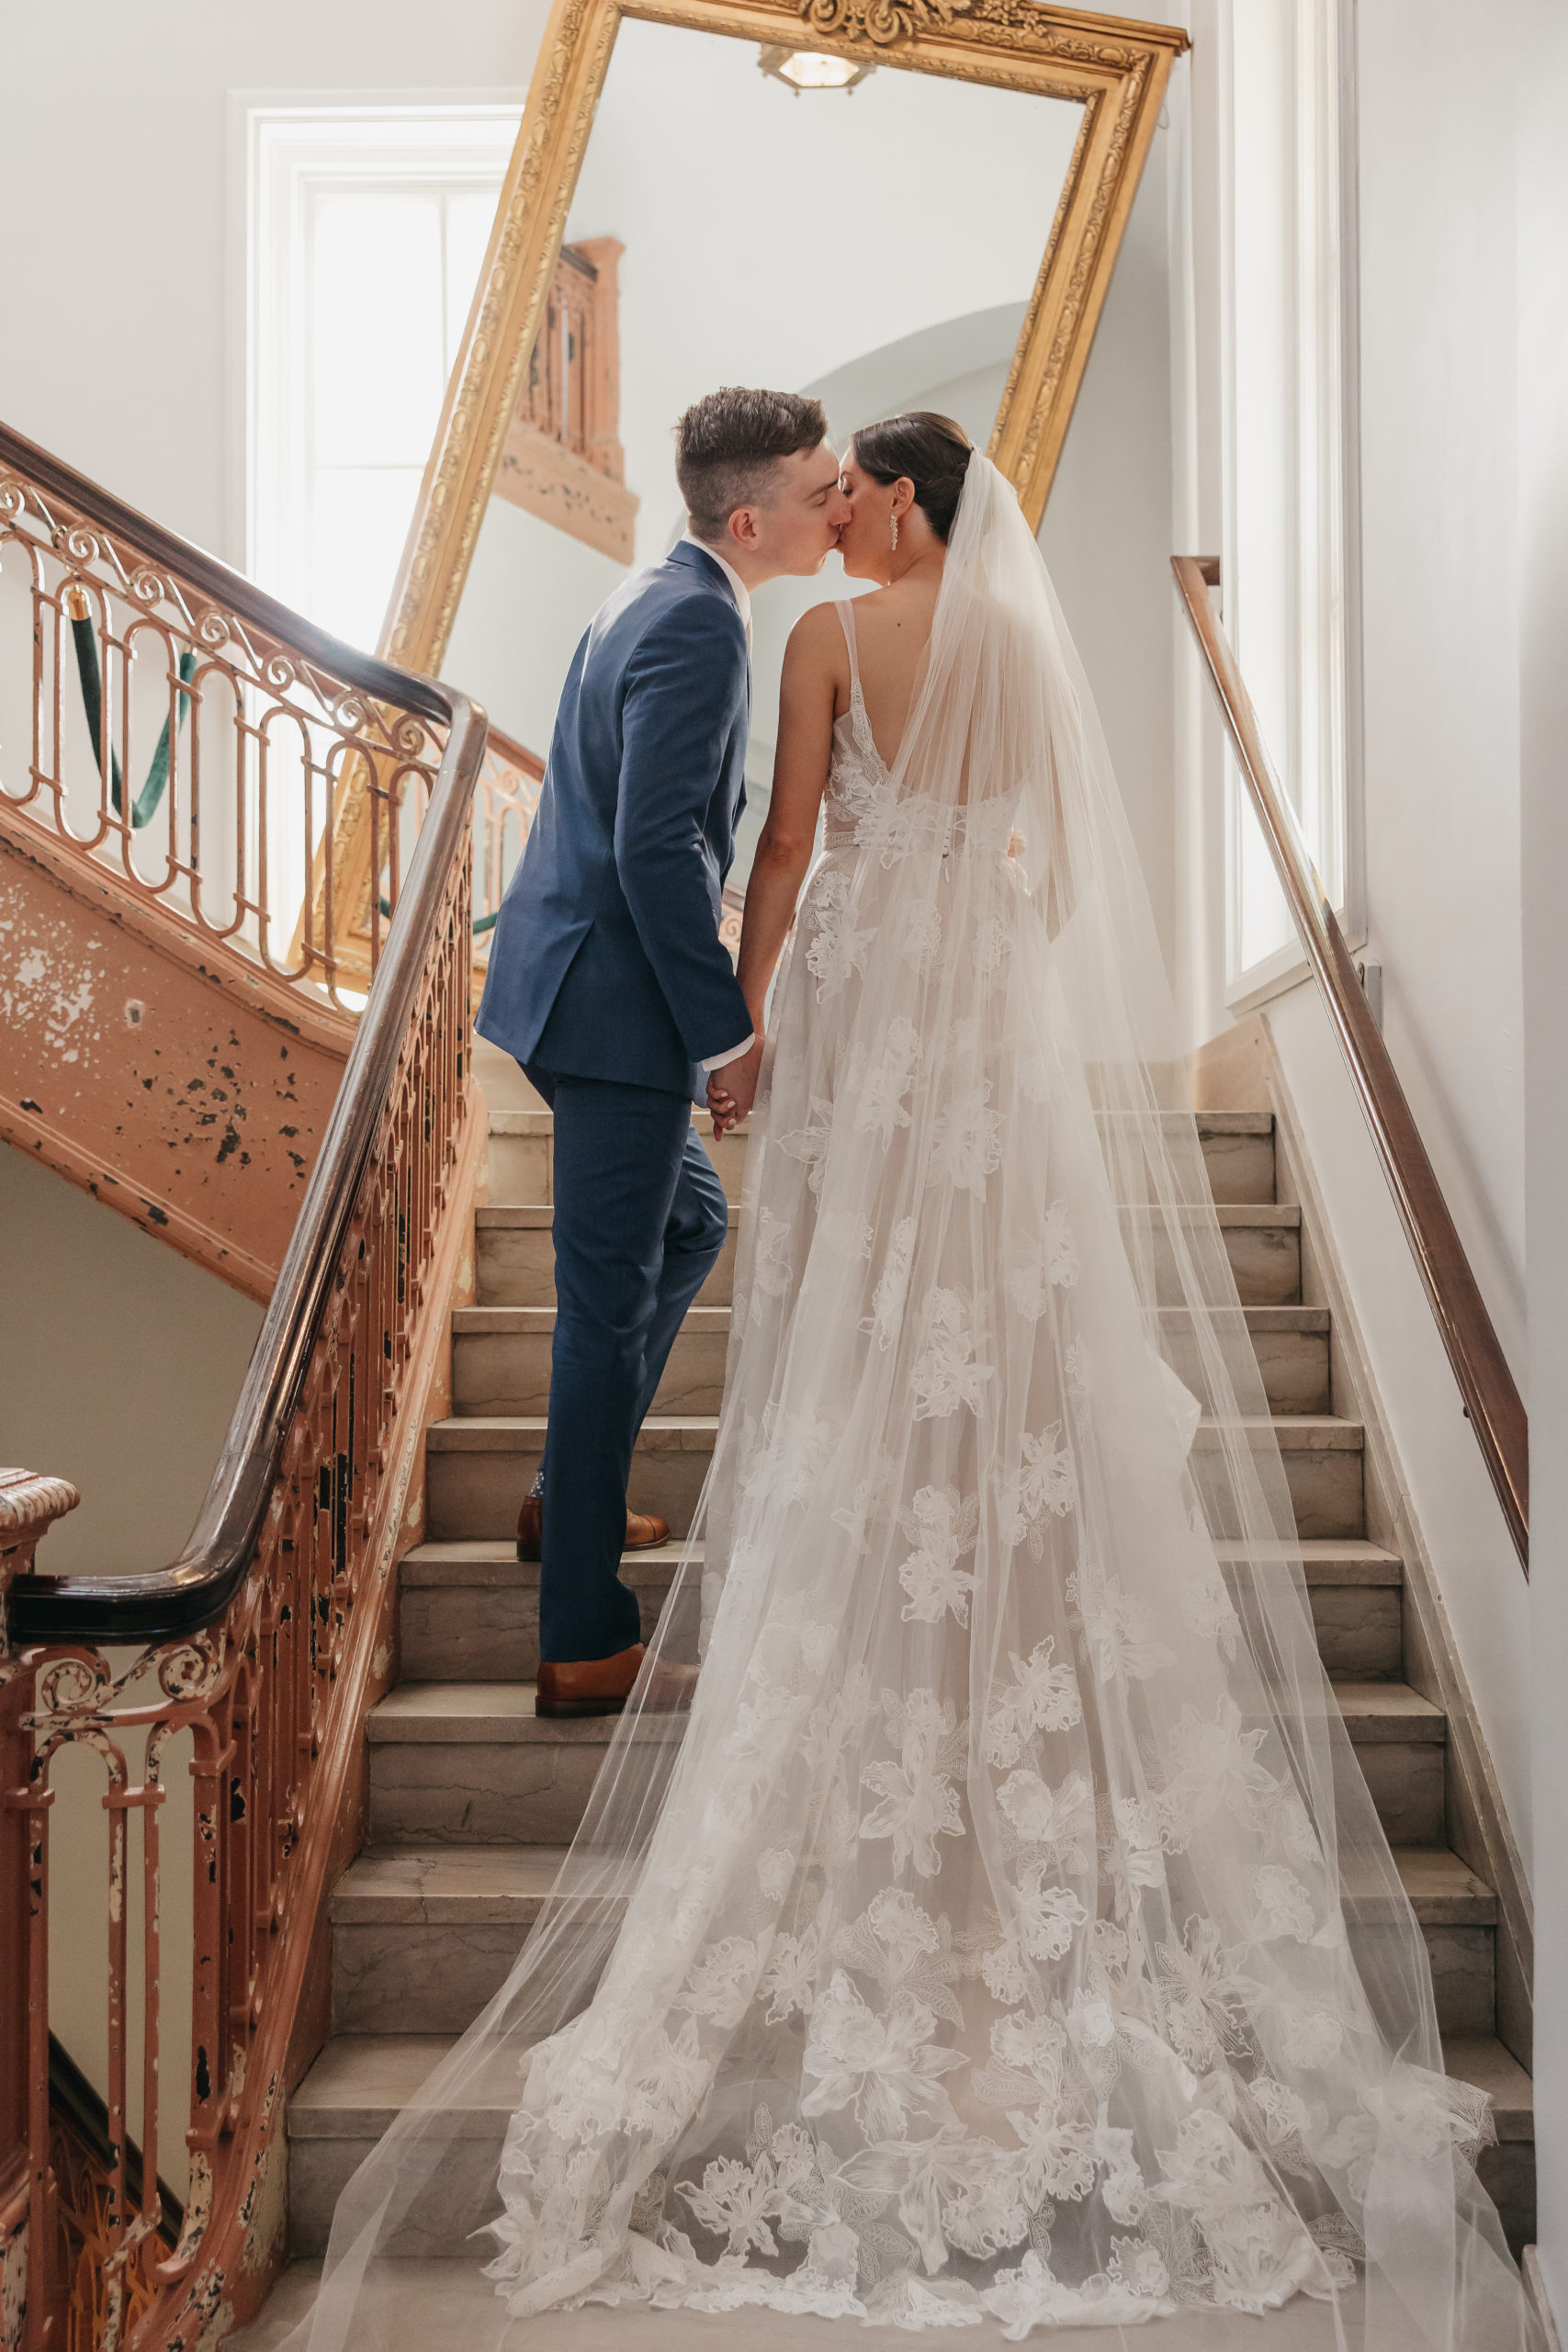 Bride and groom sharing a kiss as they hold hands on the stairs, taken by Rachel Yearick Photography